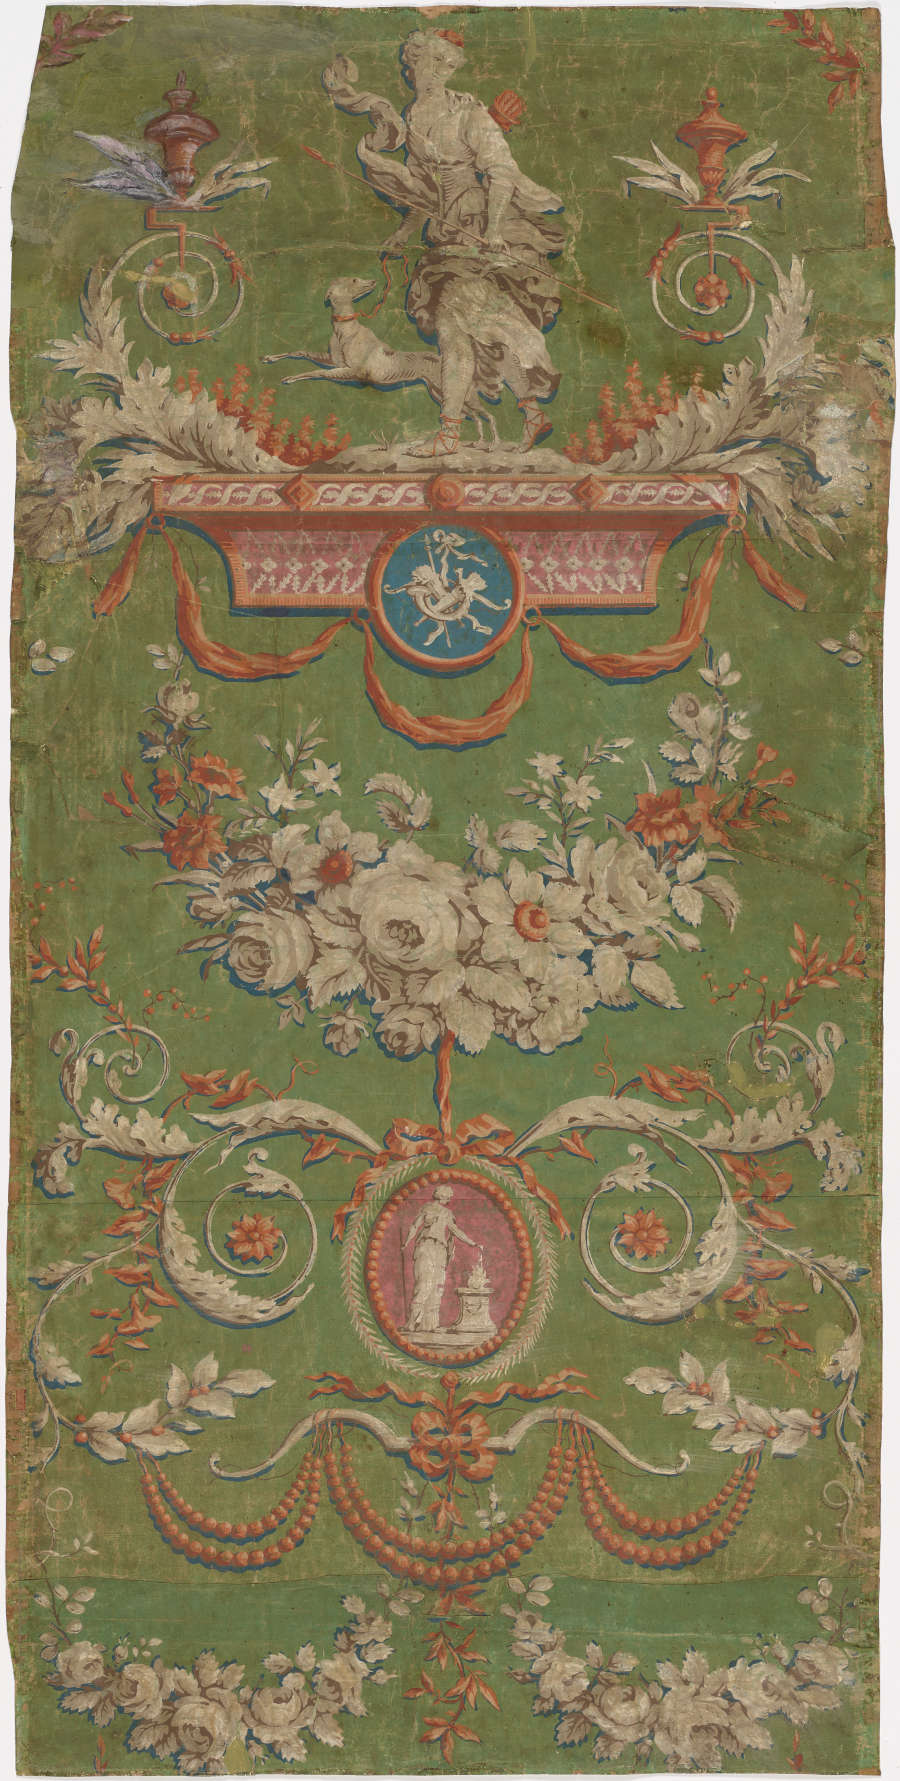 Panel of vintage wallpaper featuring vibrant floral motifs with a central crest accented in red and gold, and a warrior figure atop. The intricate design is against an olive background.